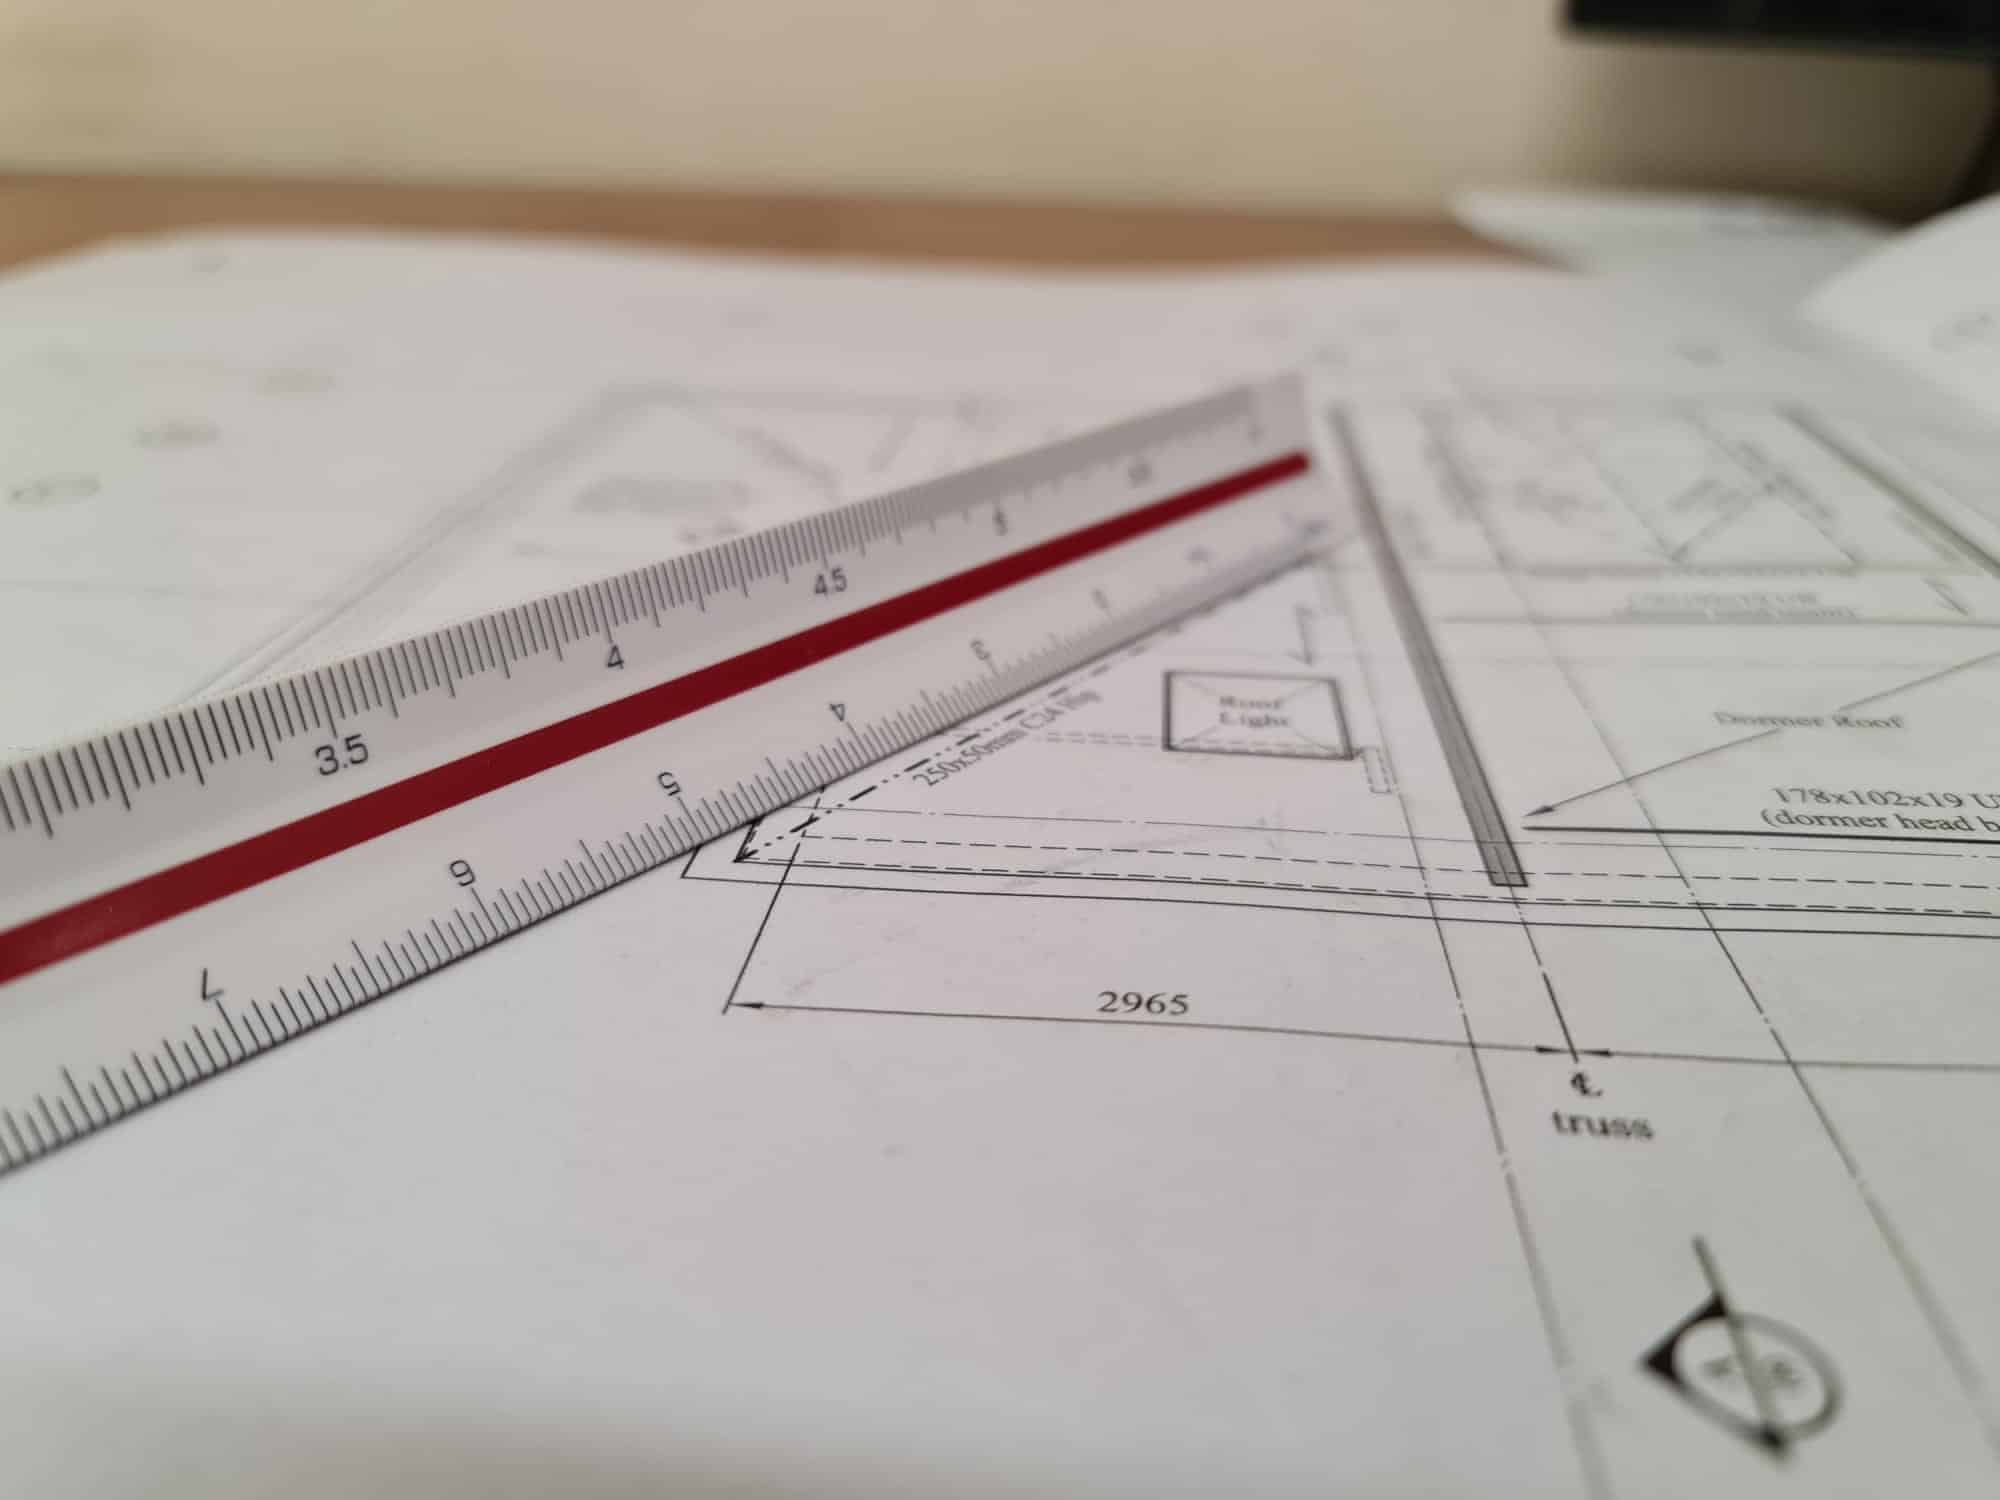 Design architect or engineer drawing for structural steel